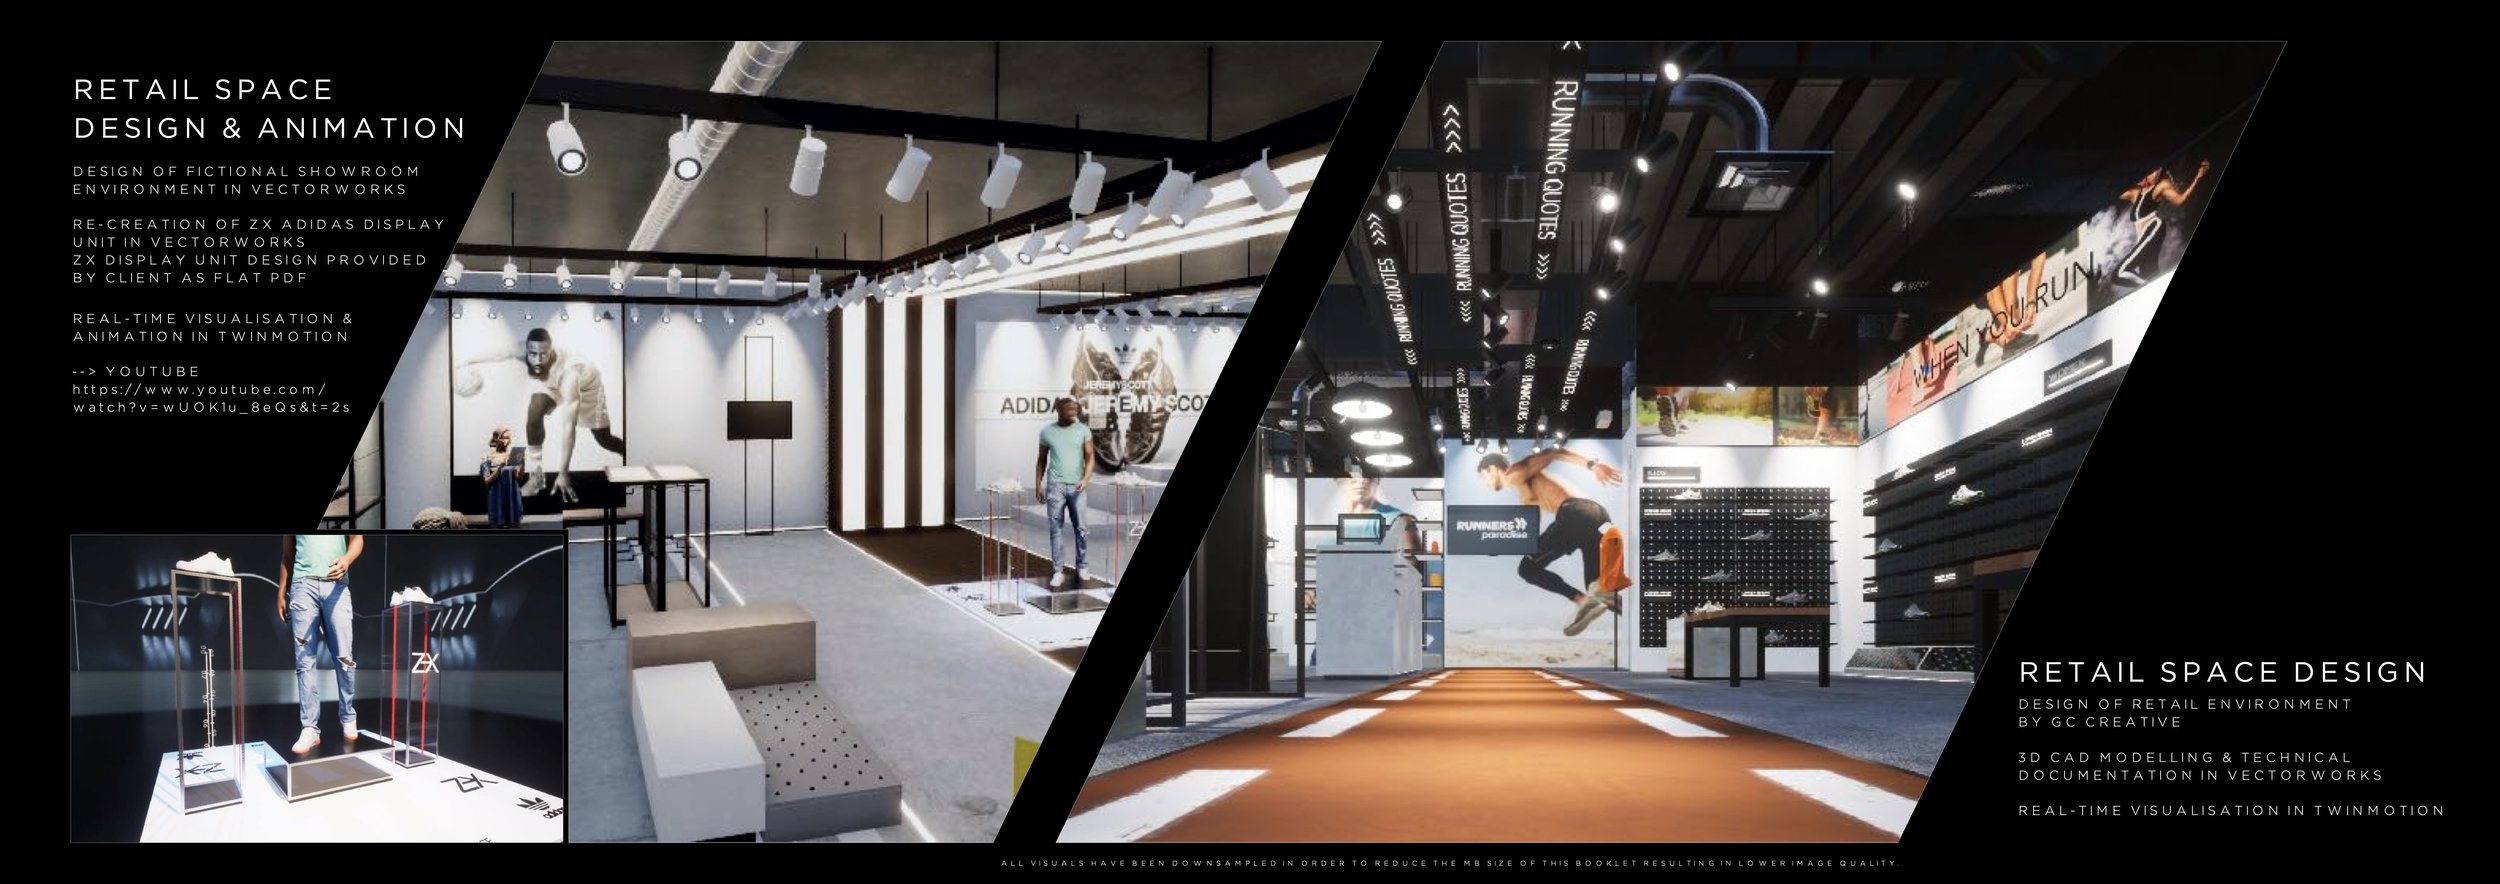 Grethe+Connerth+Twinmotion+Vectorworks+Real Time Visualisations+3D Model+Archviz+Trade+Show+Displays+Expo+Booth+Exhibition+Display+Design+Expo+Booth+Gallery+Museum+Retail+Brand+Academy+Commercial+Event+Environment+RETAIL SPACES.JPG